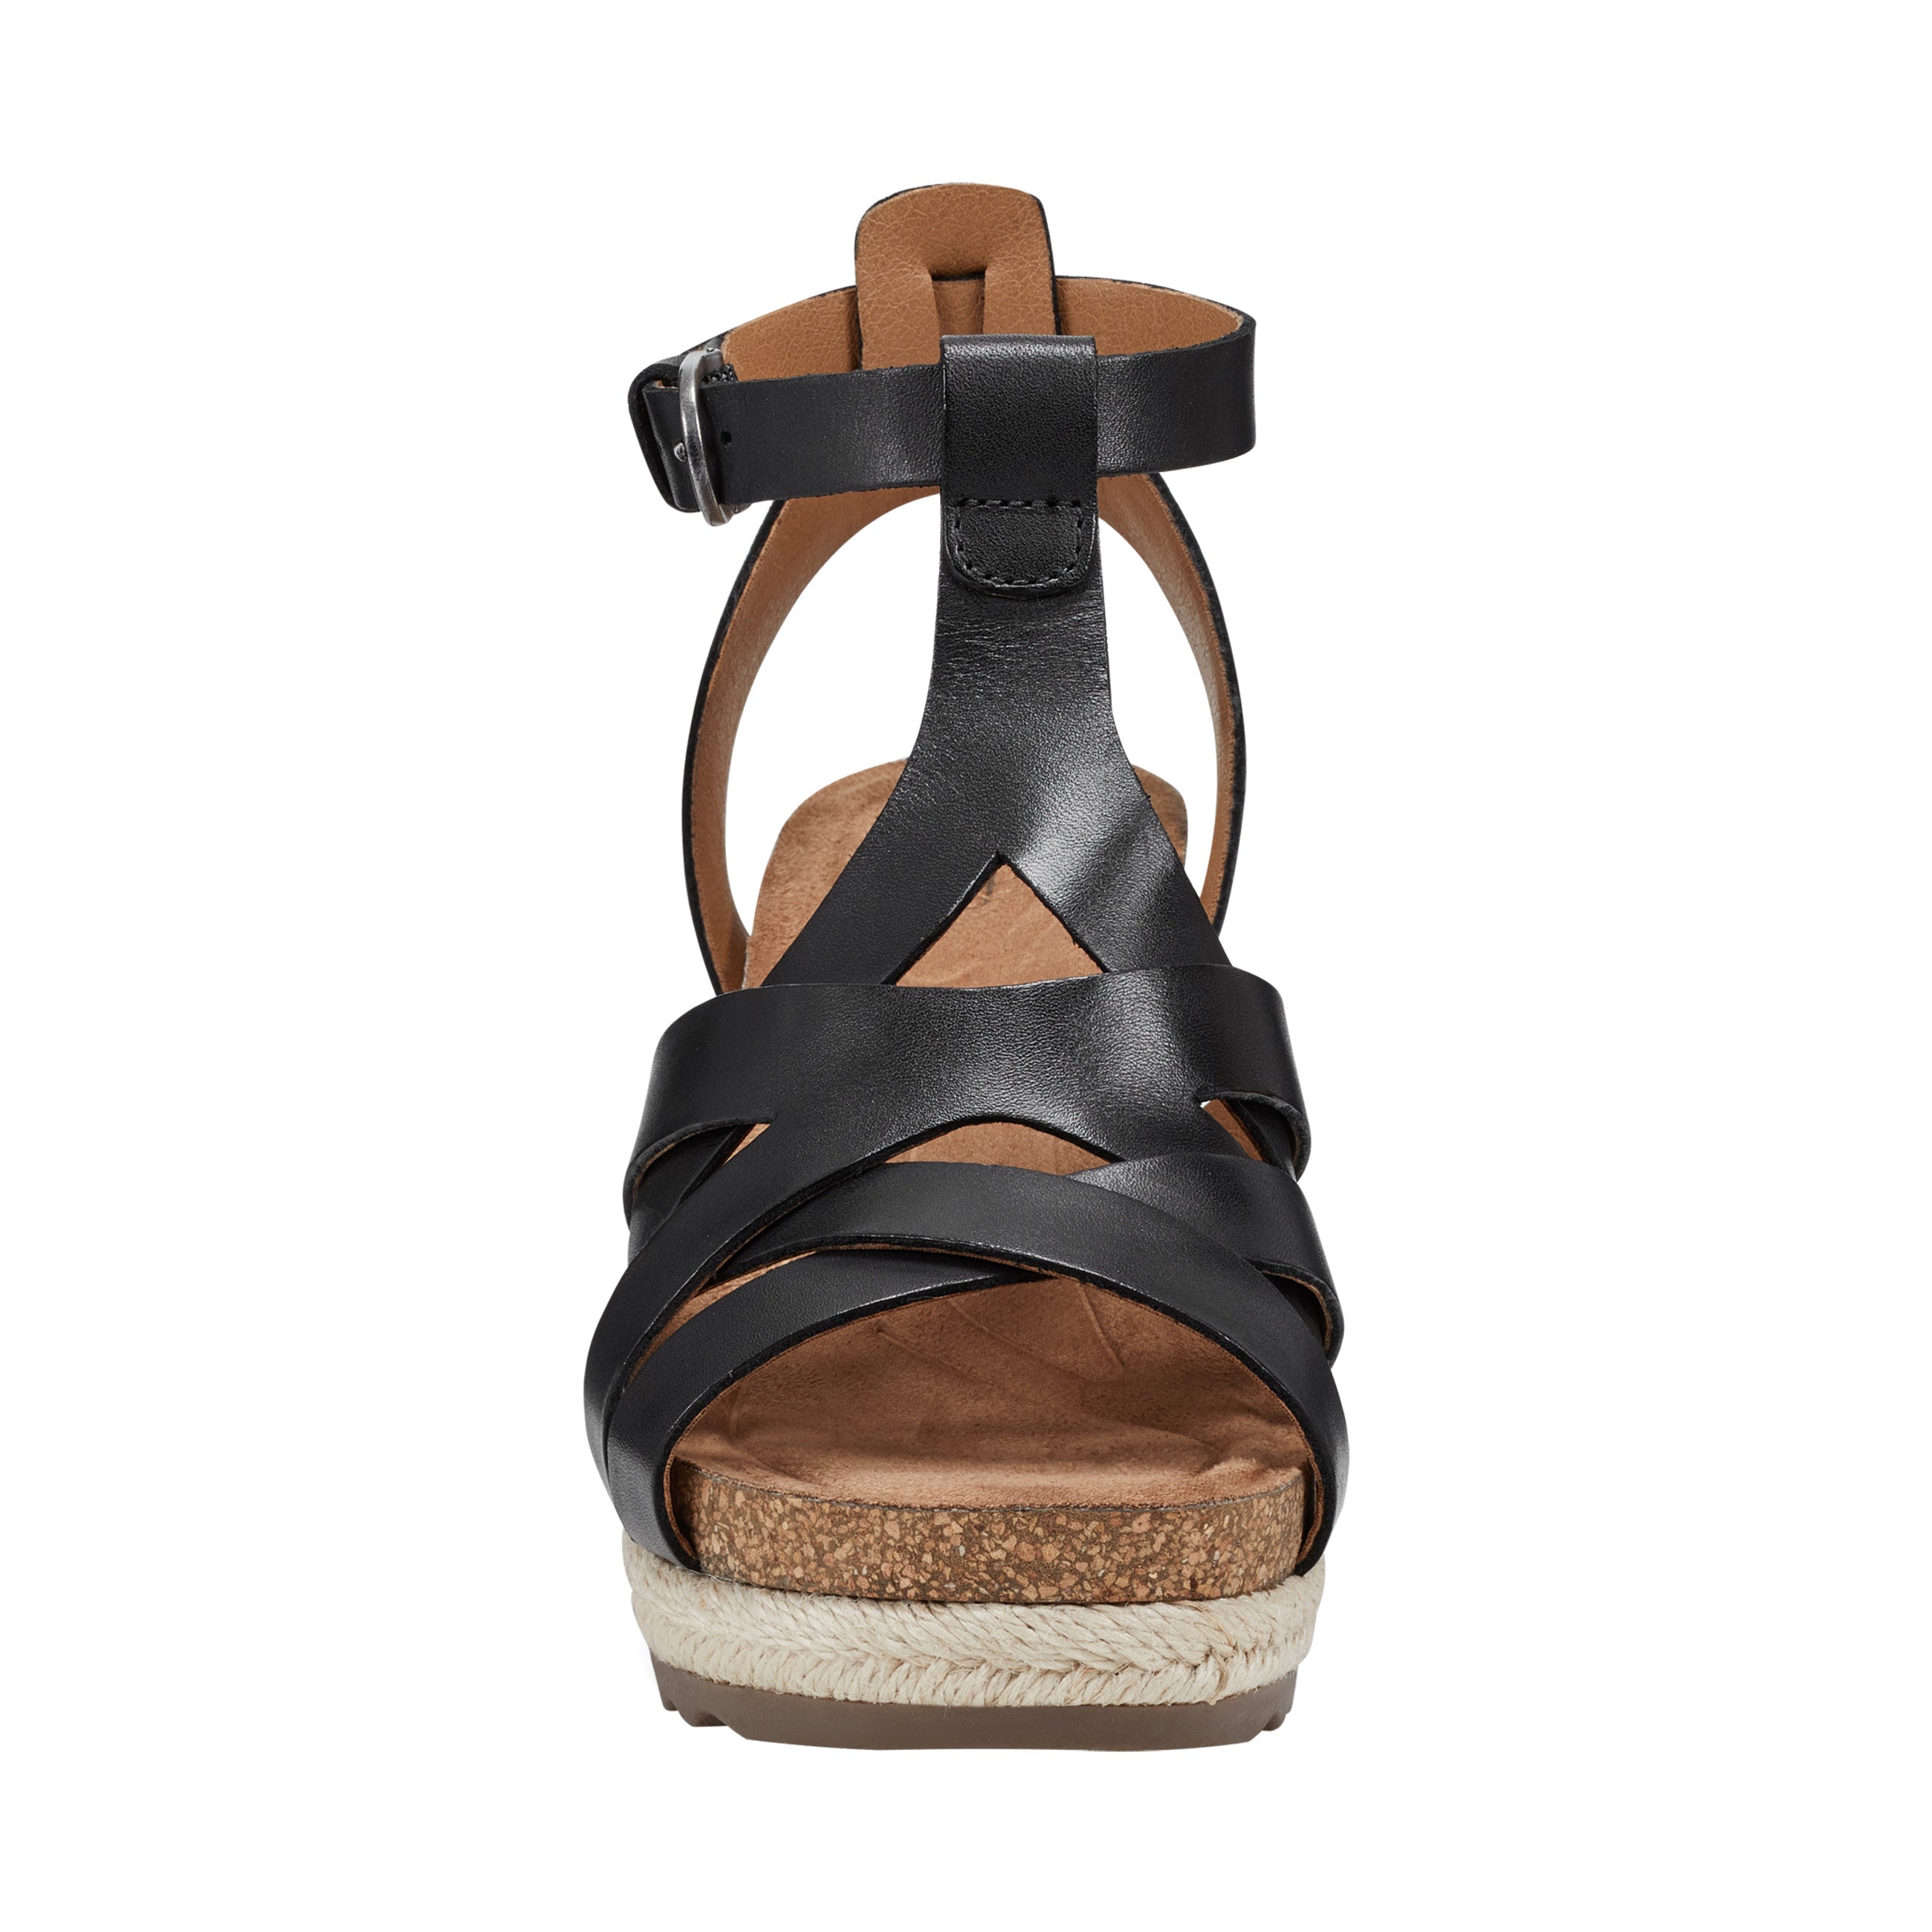 Malera Woven Casual Wedge Sandals